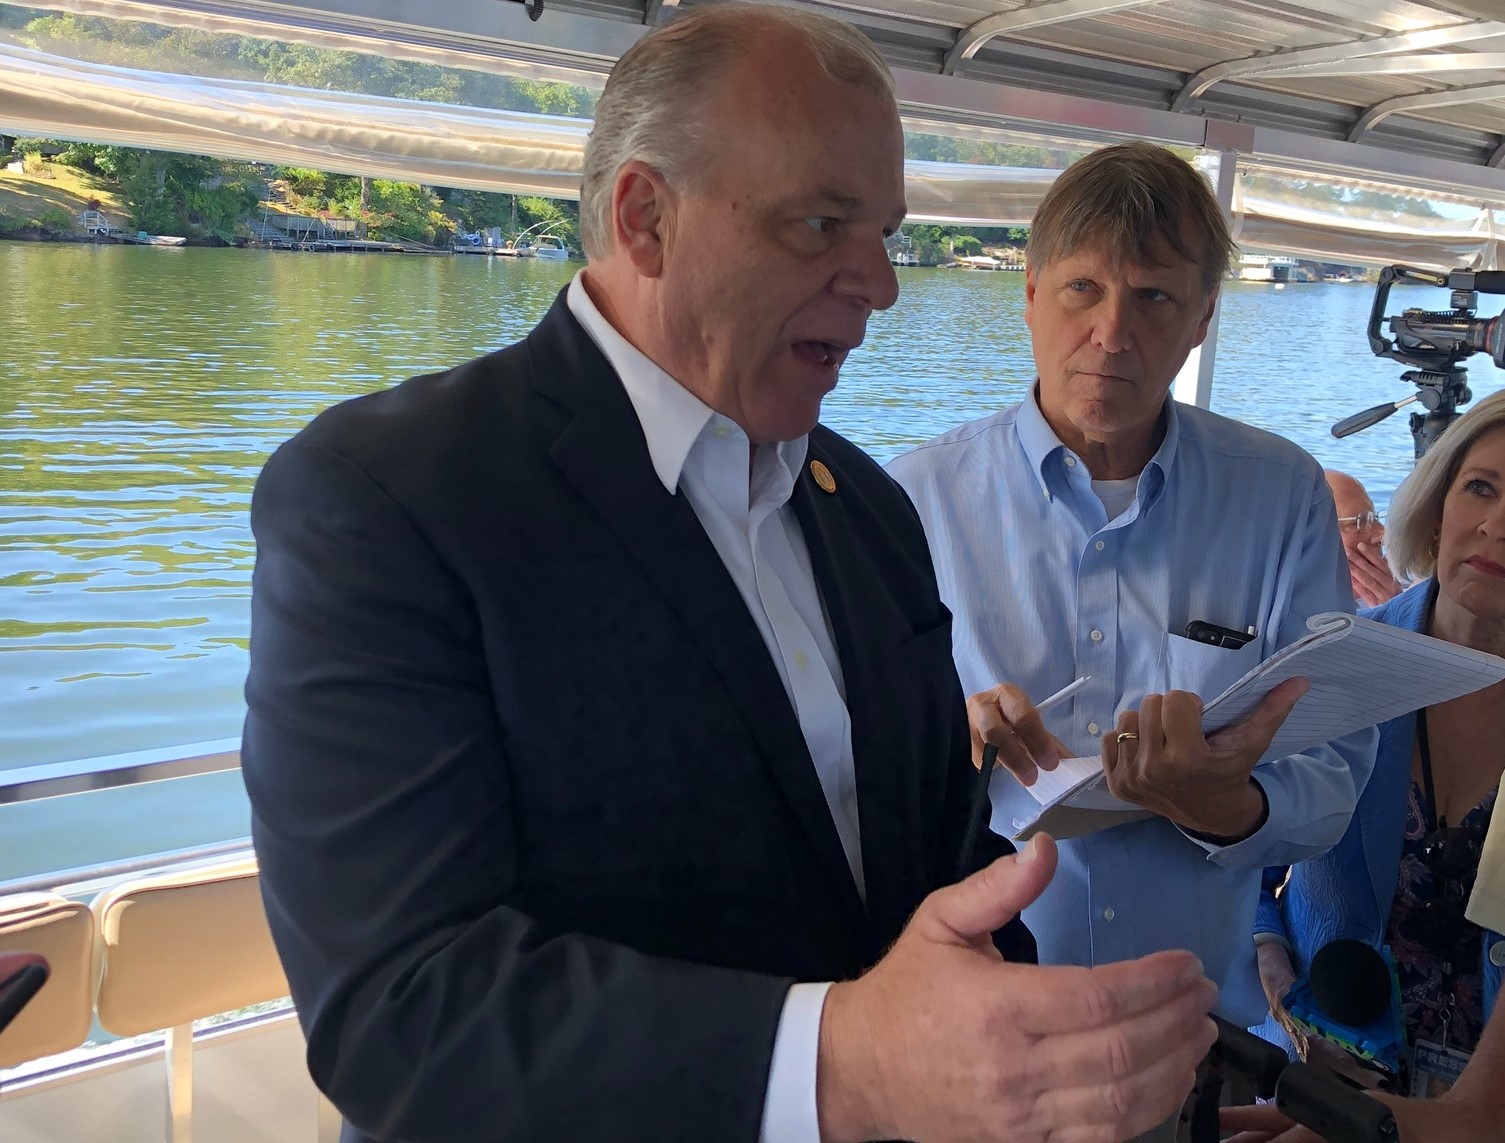 Sweeney & Greenstein Call for Action on Clean Water - InsiderNJ